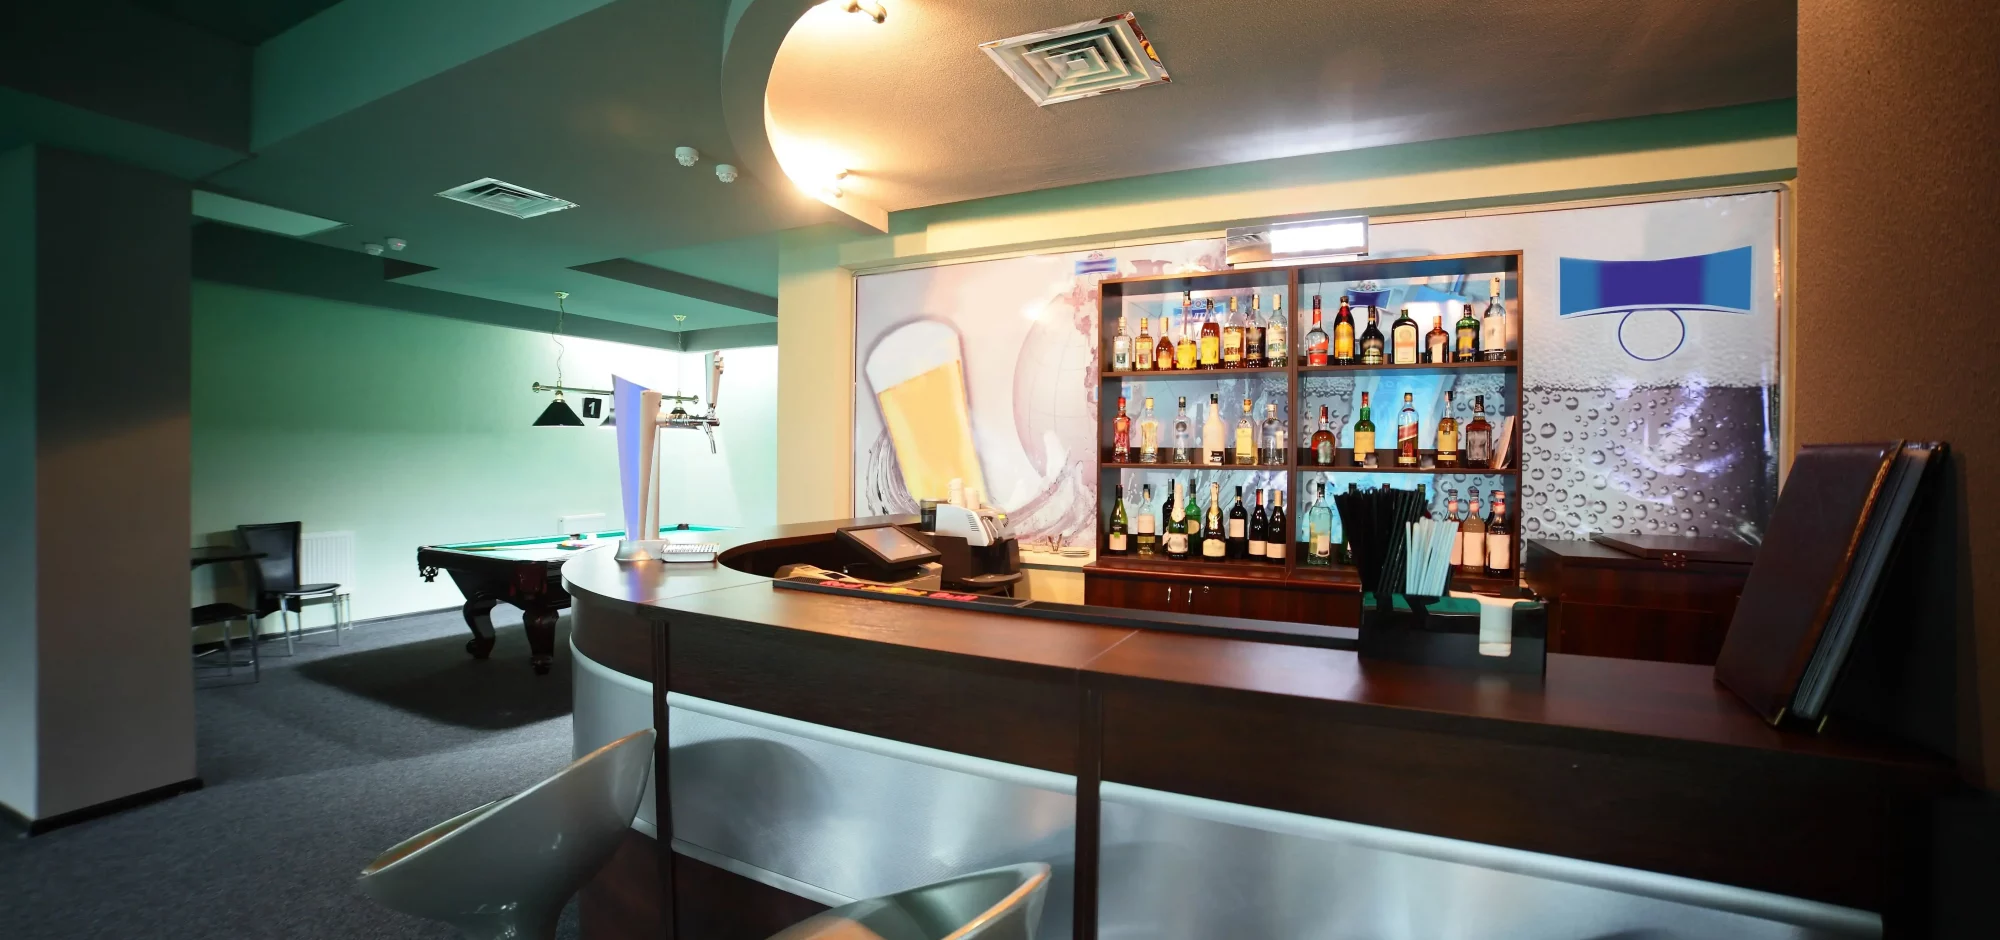 10 Curved Home Bar Designs for 2022